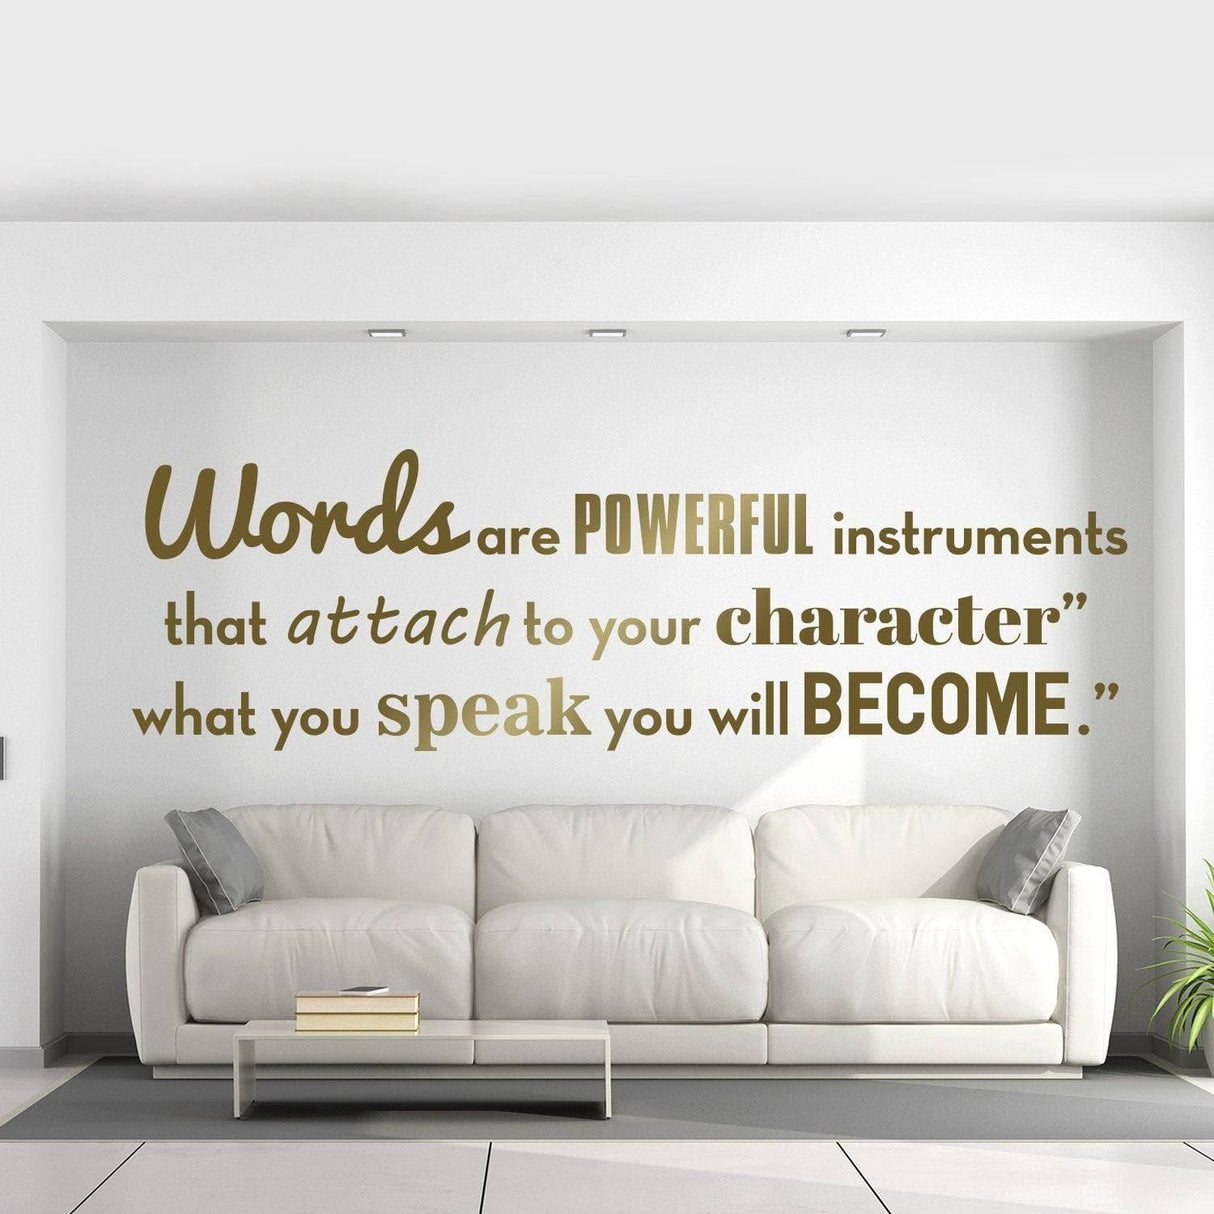 Inspirational Wall Vinyl Quote Sticker - Motivational Positive Inspiration Decal - Motivating Bedroom Classroom Saying - Words Are Powerful - Decords